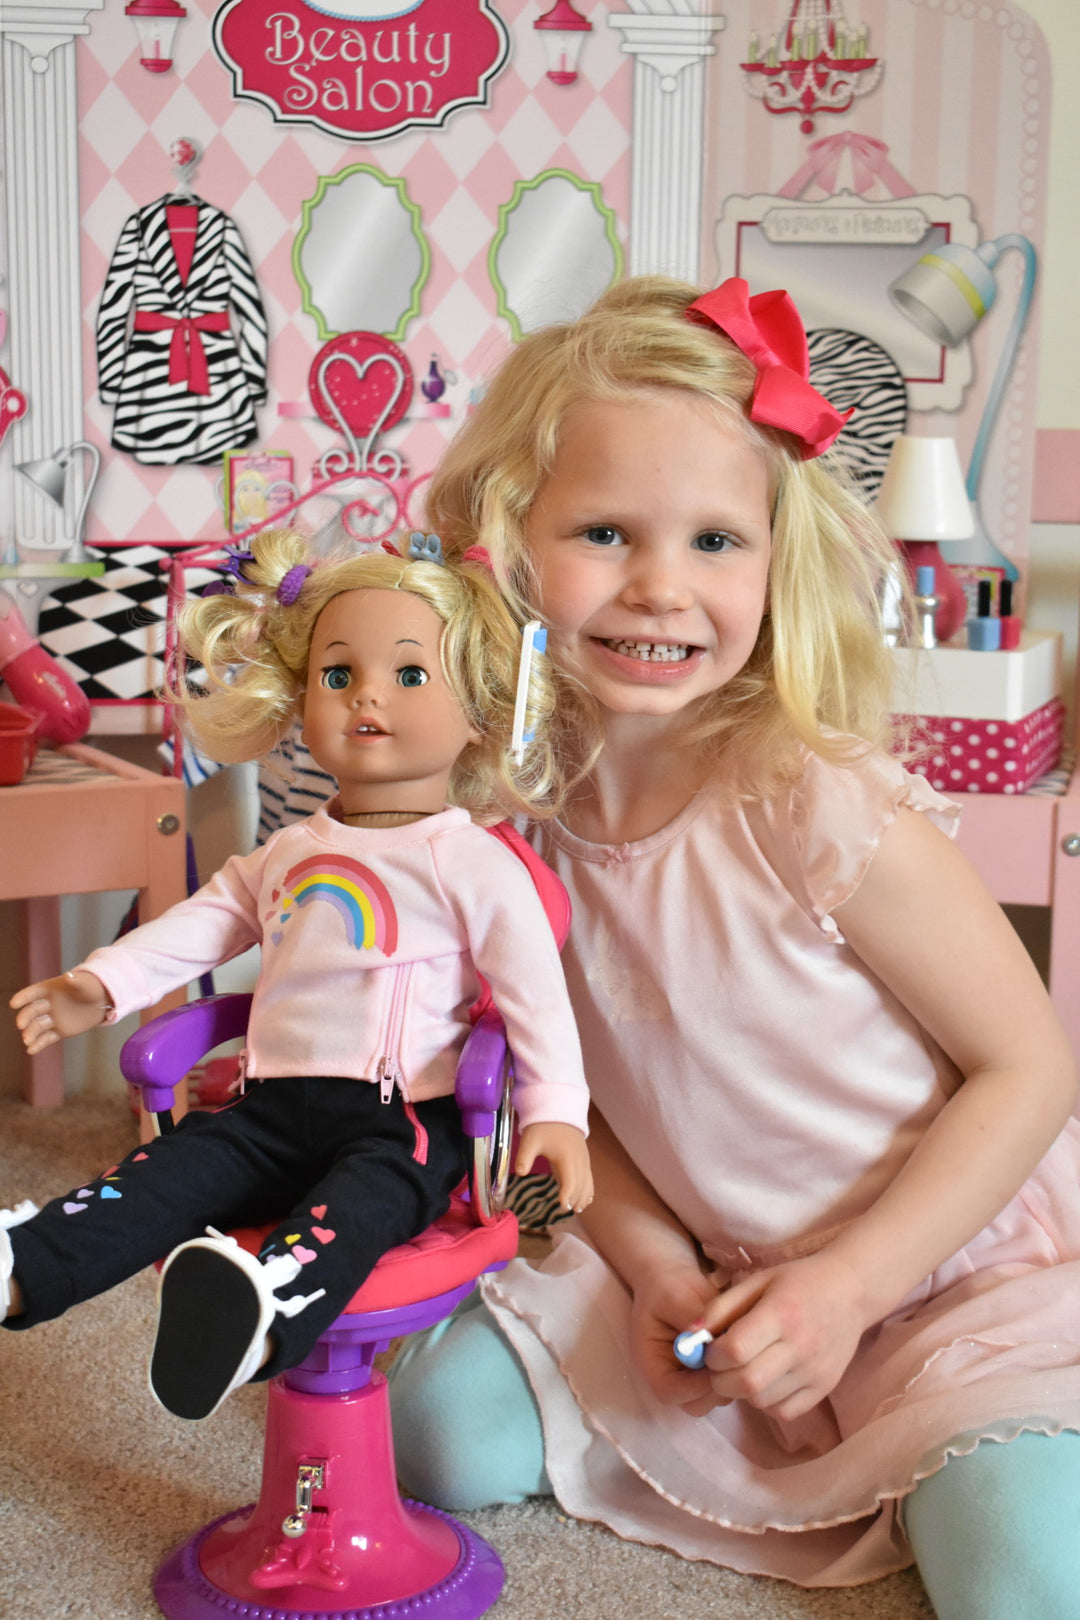 A little blonde girl sits next to her blonde doll playing beauty salon.